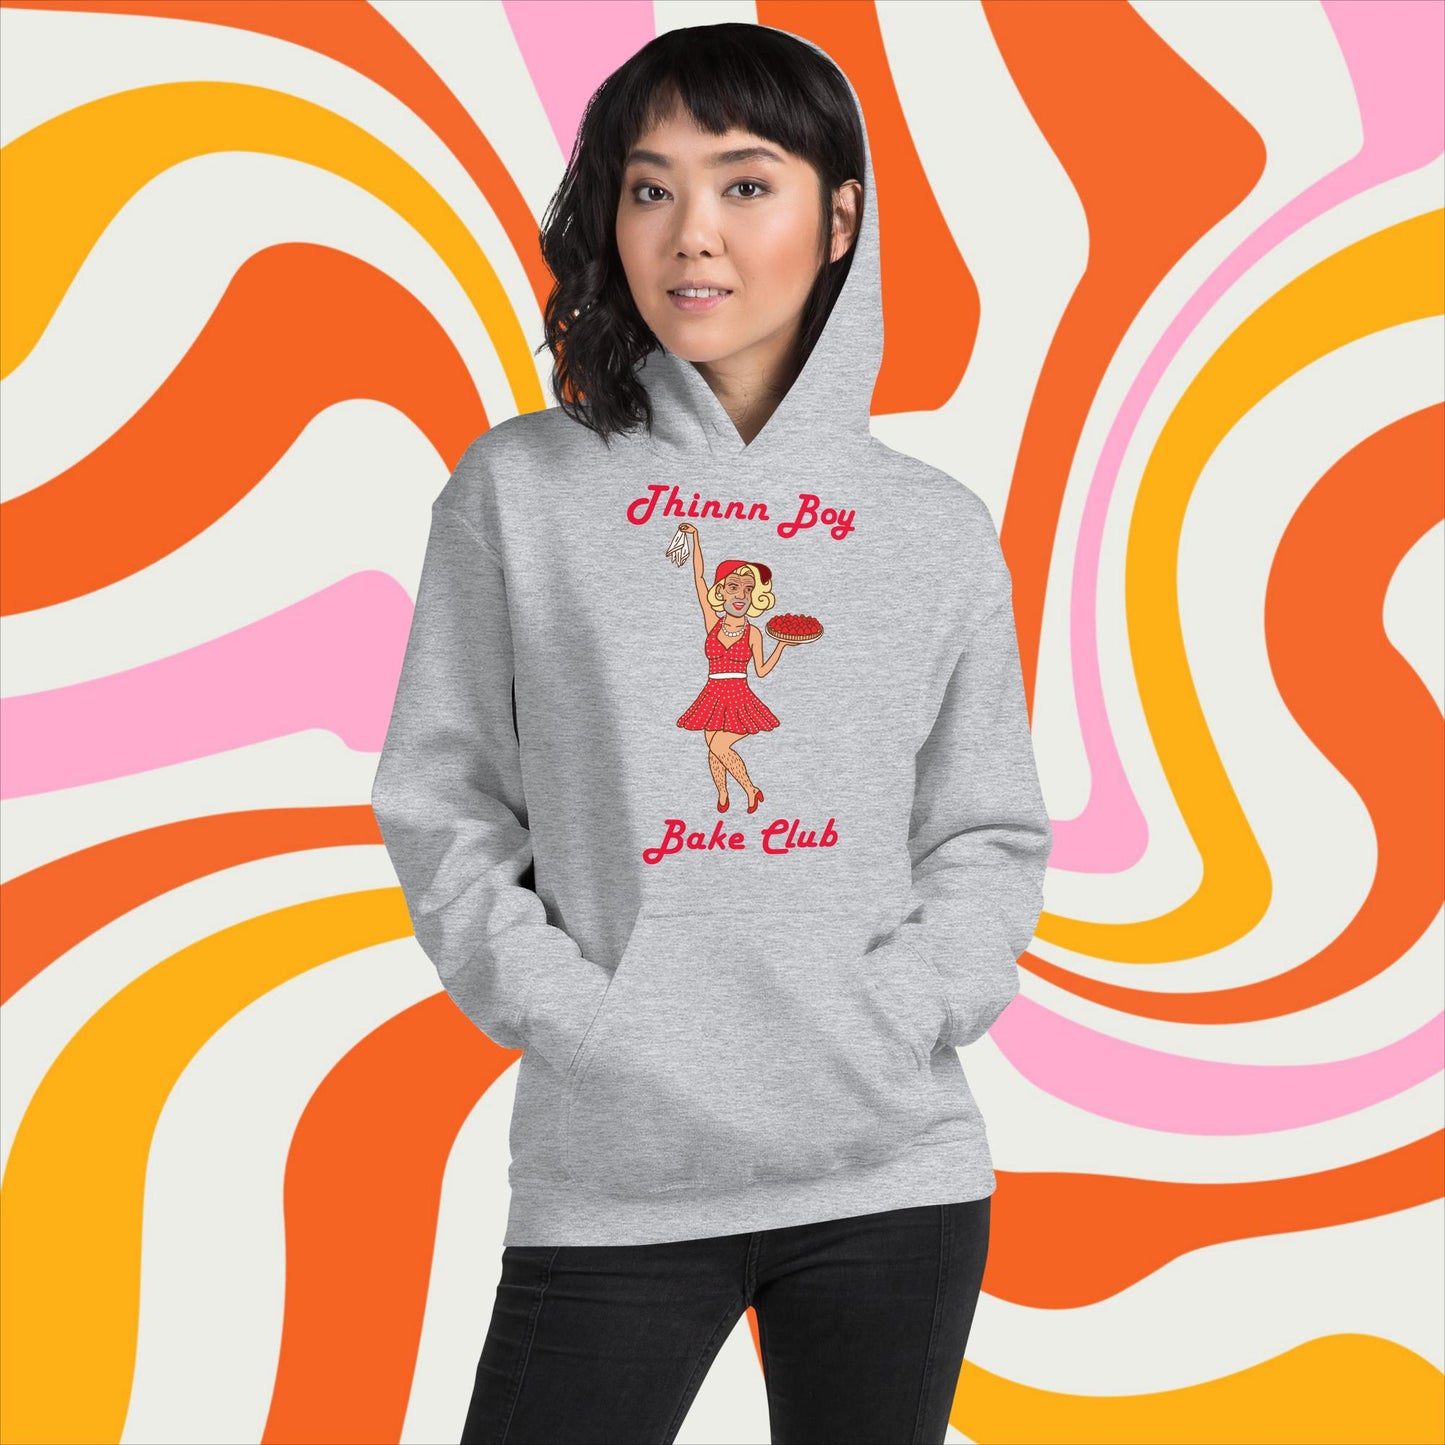 Thinnn Boy Bake Club The Fighter and The Kid TFATK Podcast Comedy 60s retro housewife Bryan Callen Unisex Hoodie Next Cult Brand